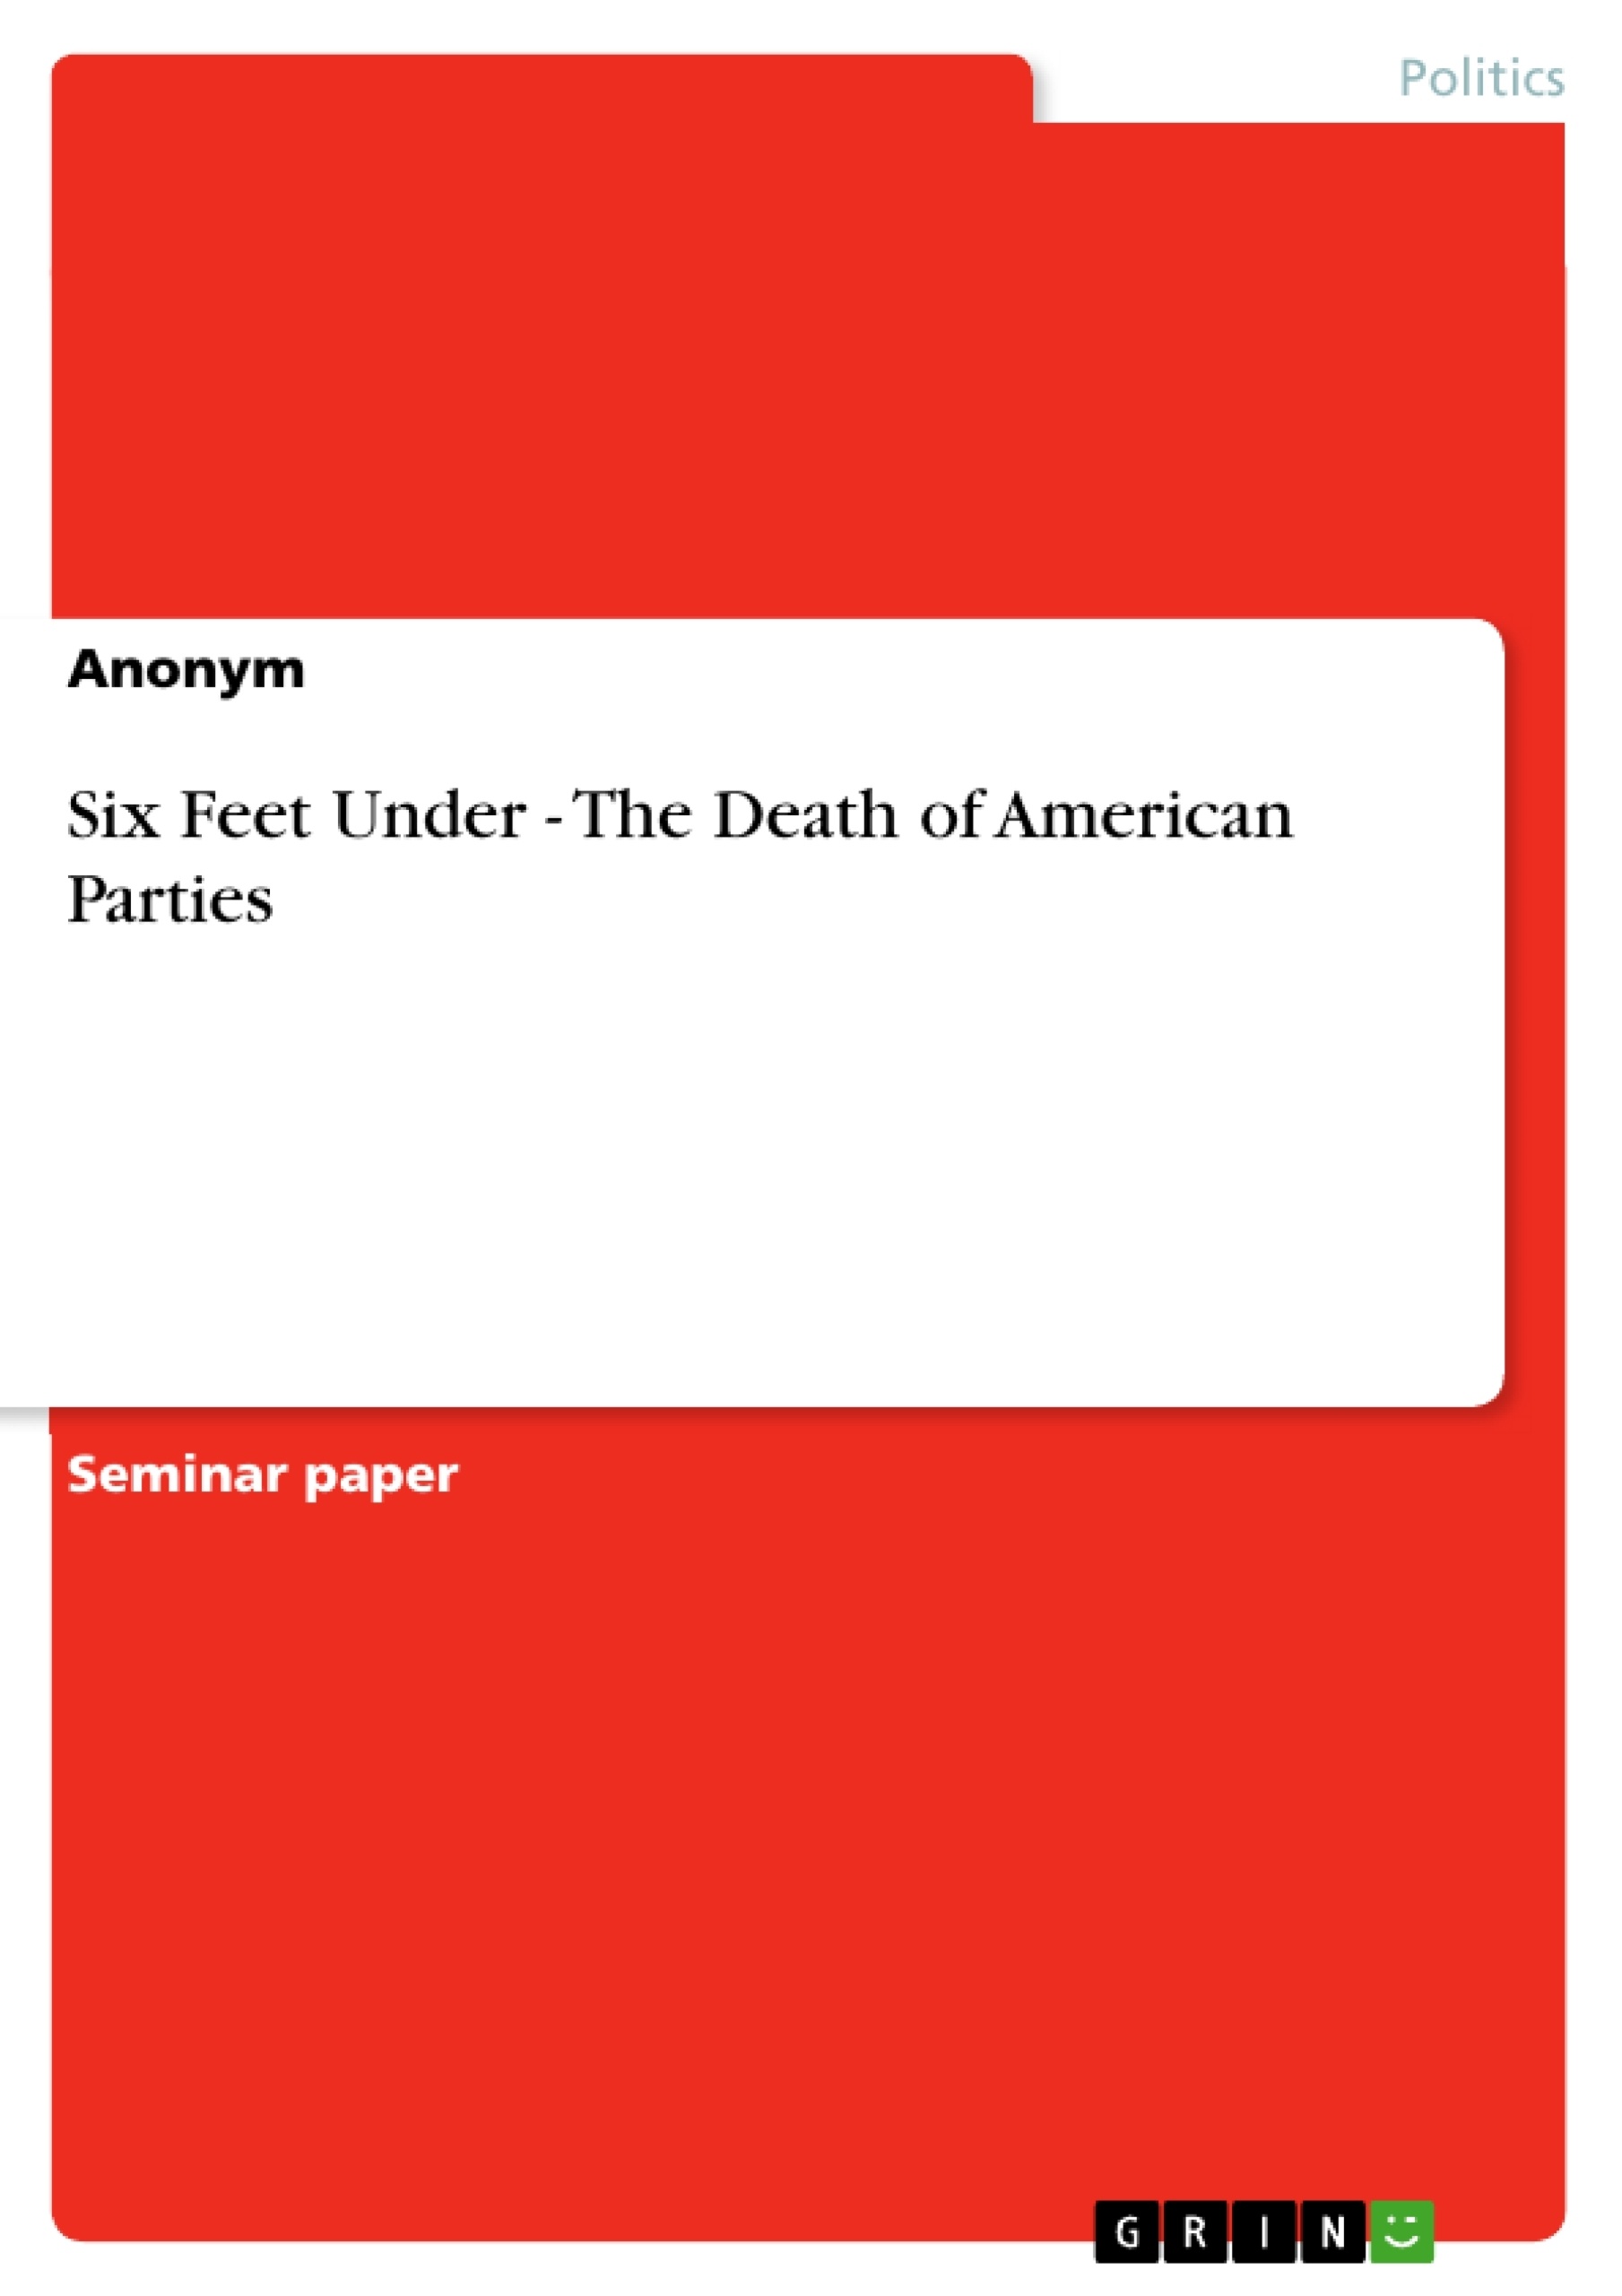 Title: Six Feet Under - The Death of American Parties